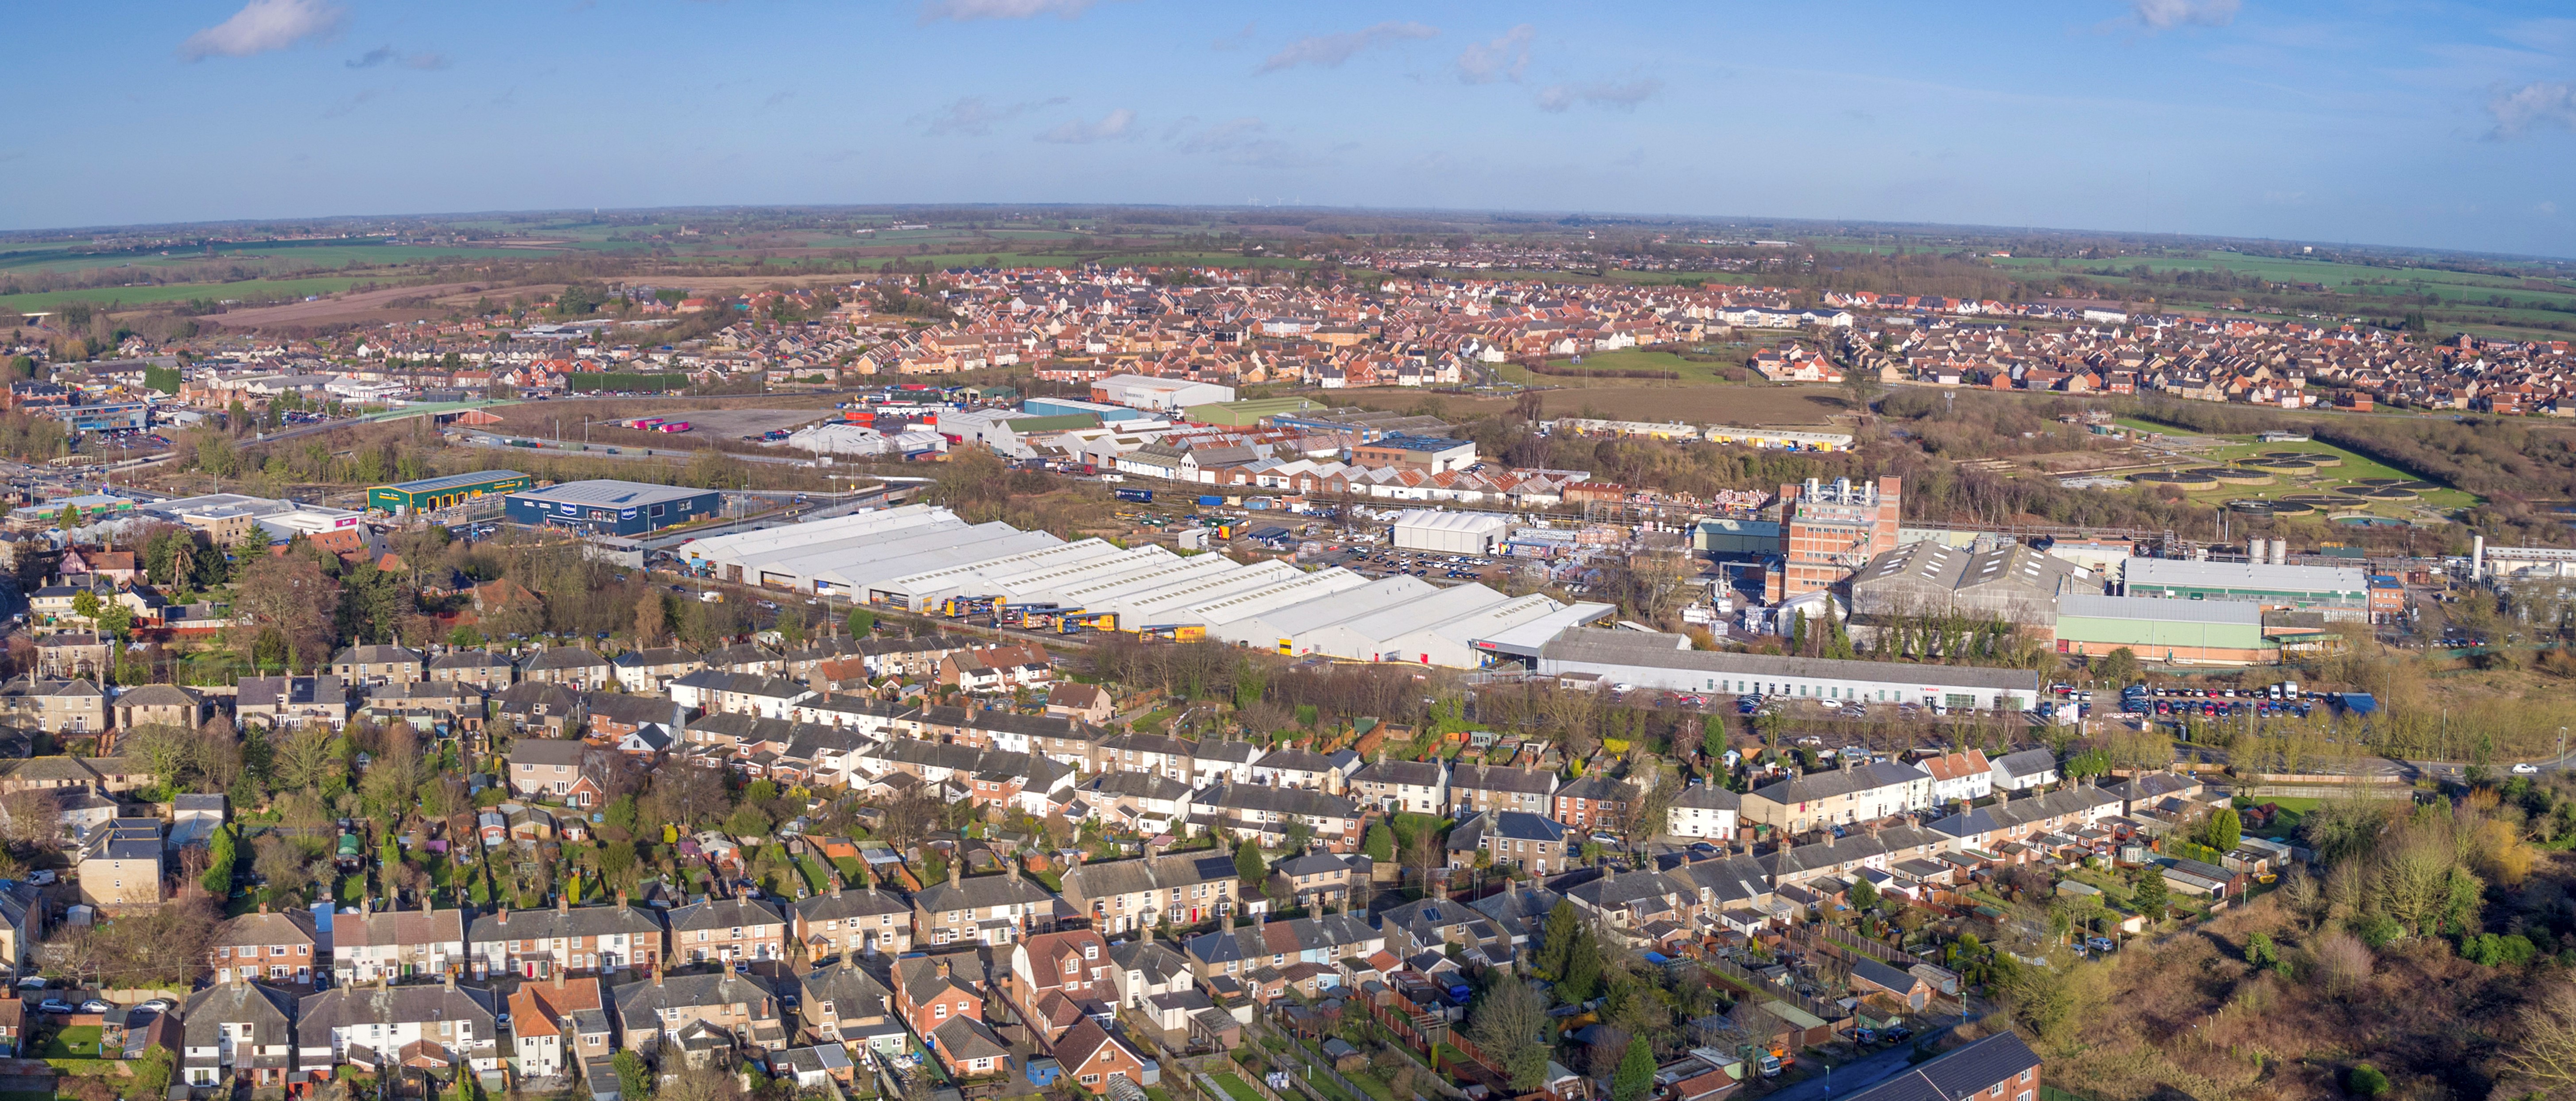 Investment sale of 16.44 acre town centre industrial property to let property with development land